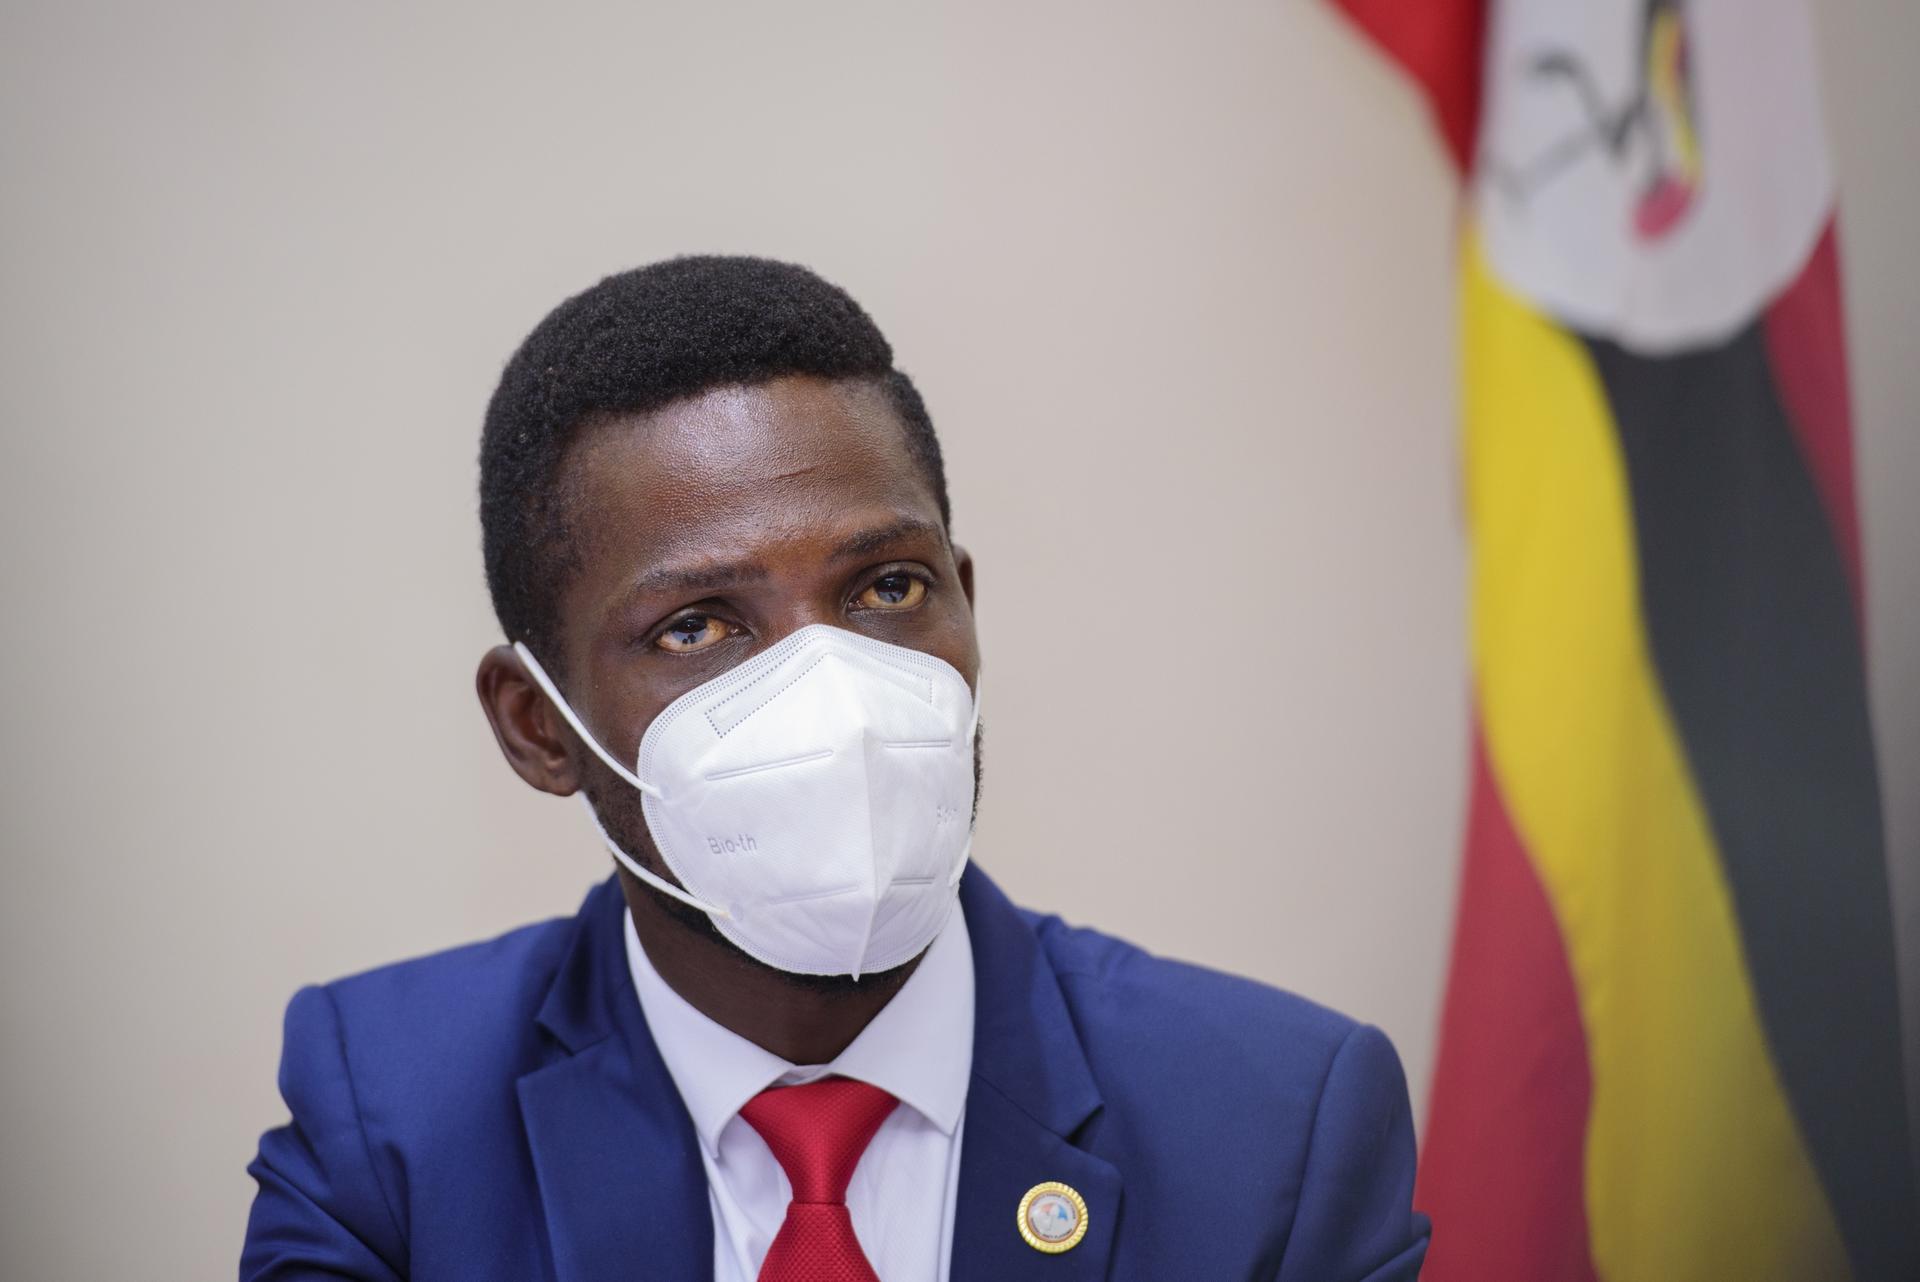 Bobi Wine, during a press conference in Kampala Uganda, Tuesday, Jan.12, 2021, wears a white face mask and blue suit with red tie. 